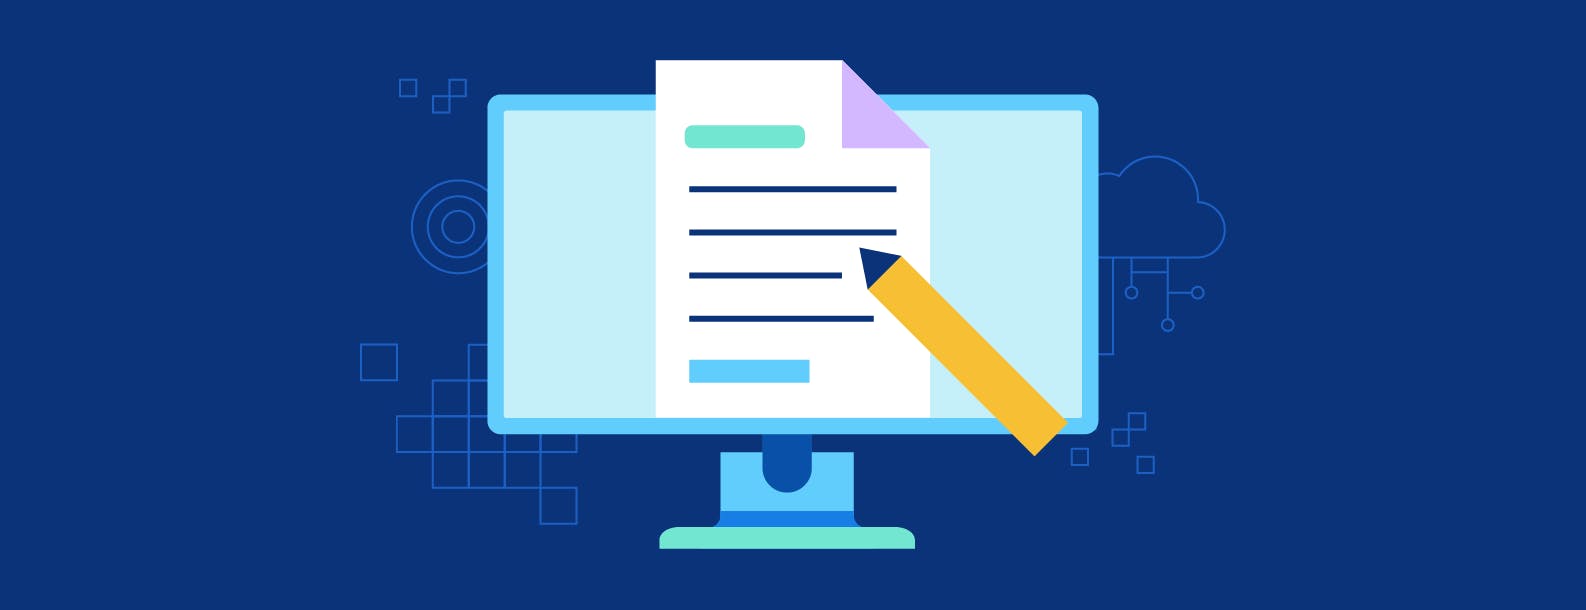 Illustration of a computer screen with a document and a pencil in front of a dark blue background